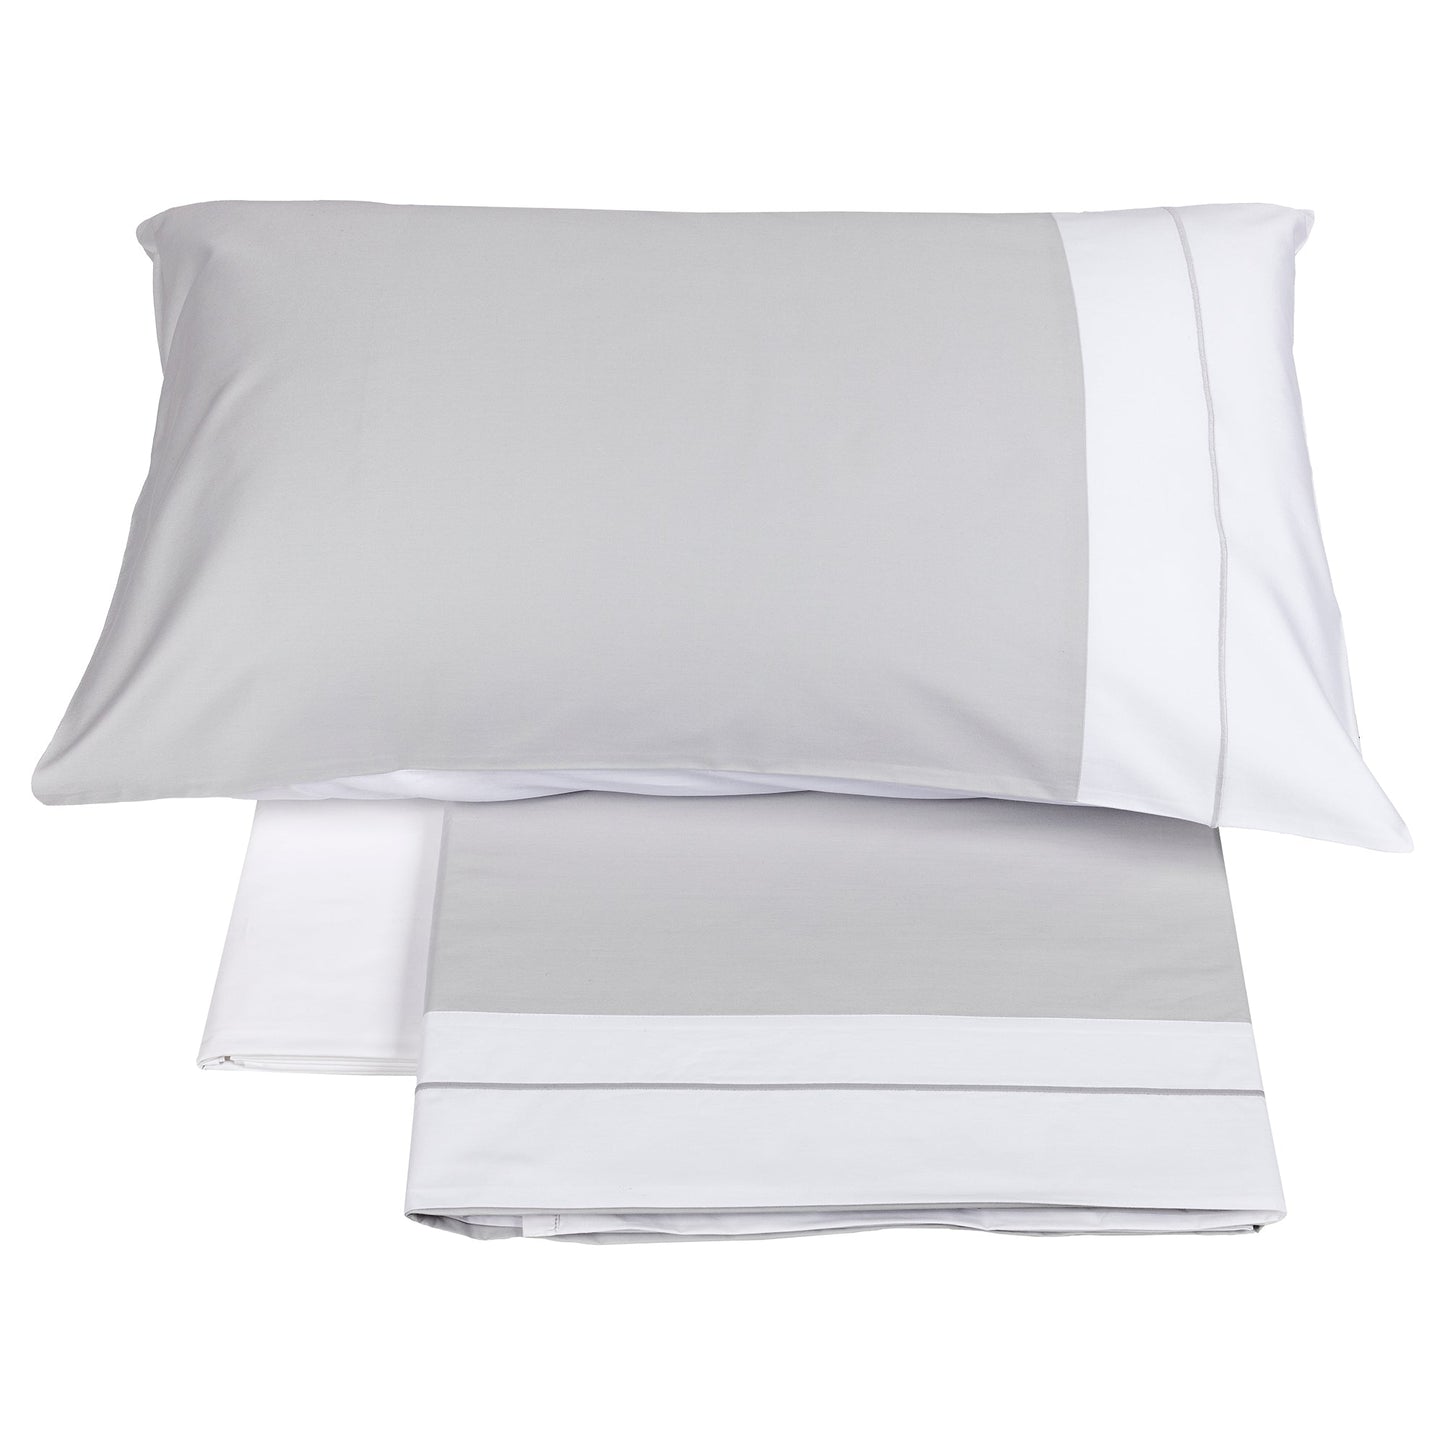 Sheet Set in Percale Cotton 250TC with Embroidered Cord - Bicocca